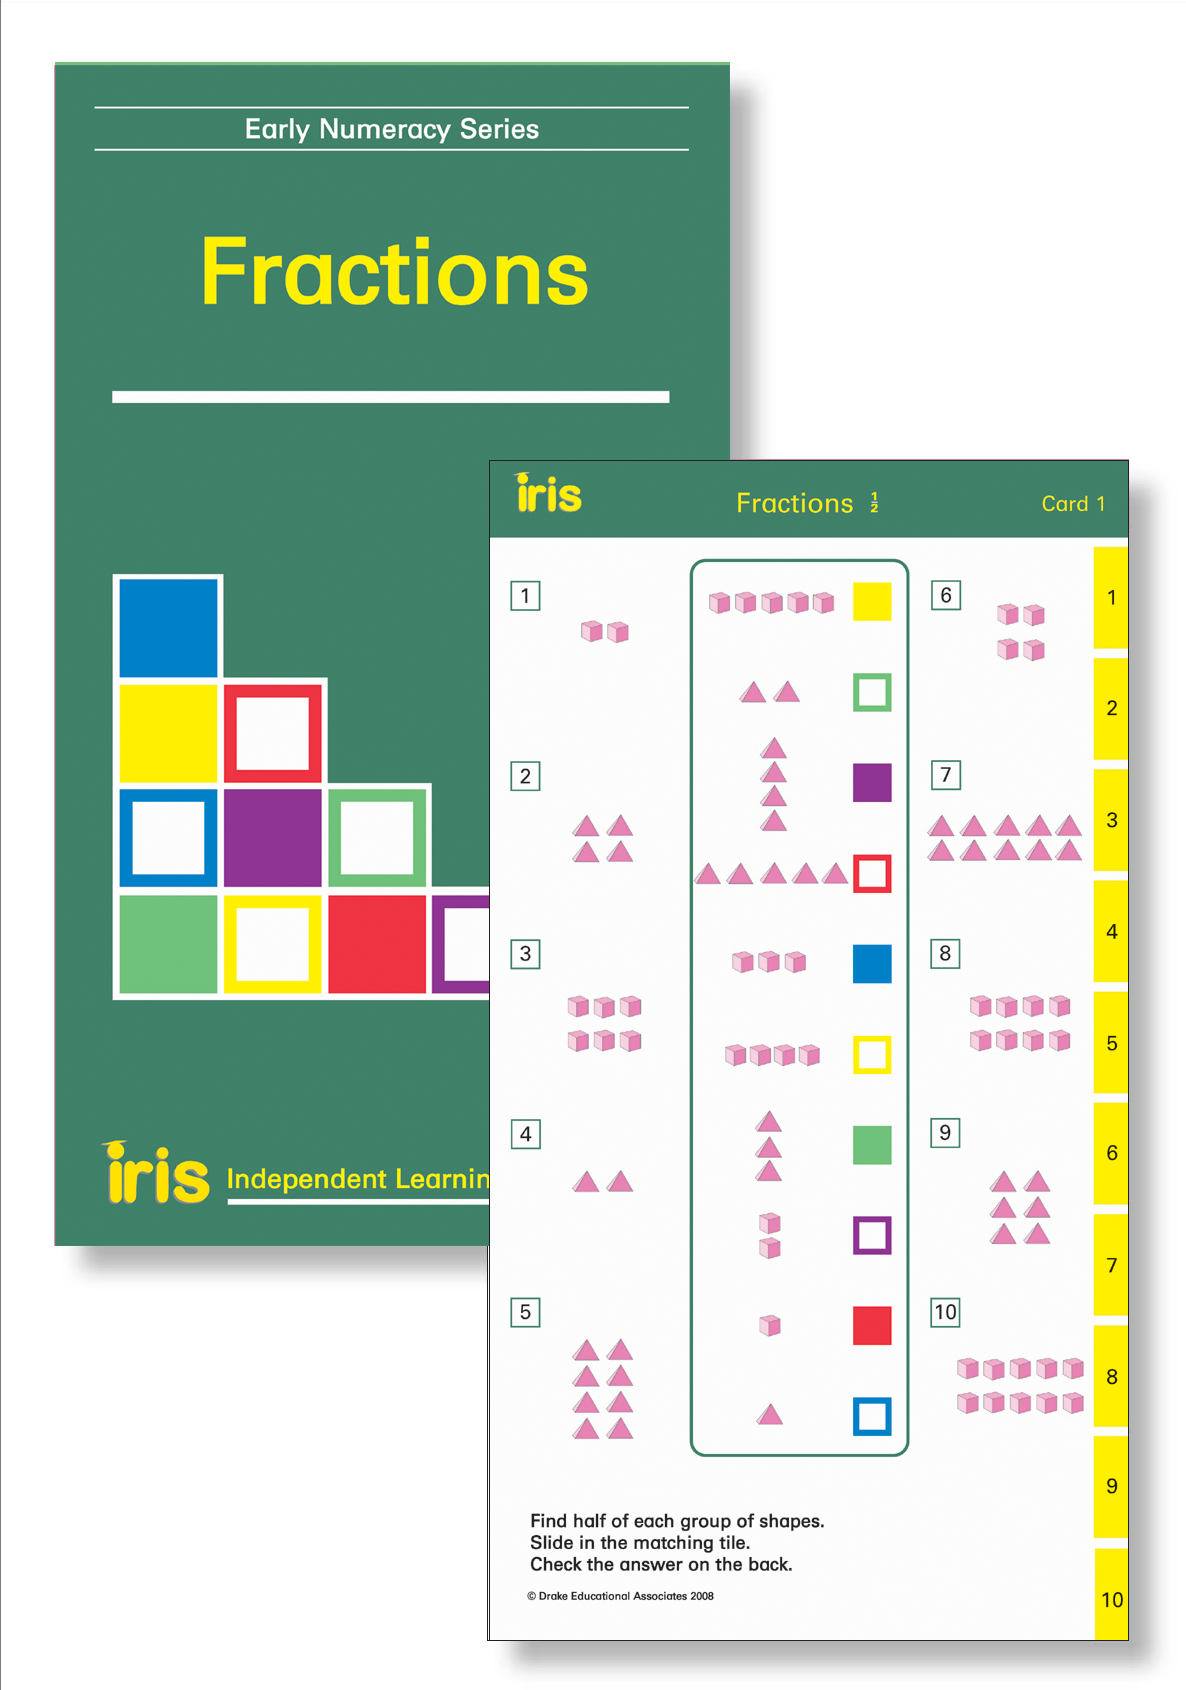 Iris Study Cards: Early Numeracy Year 2 - Fractions